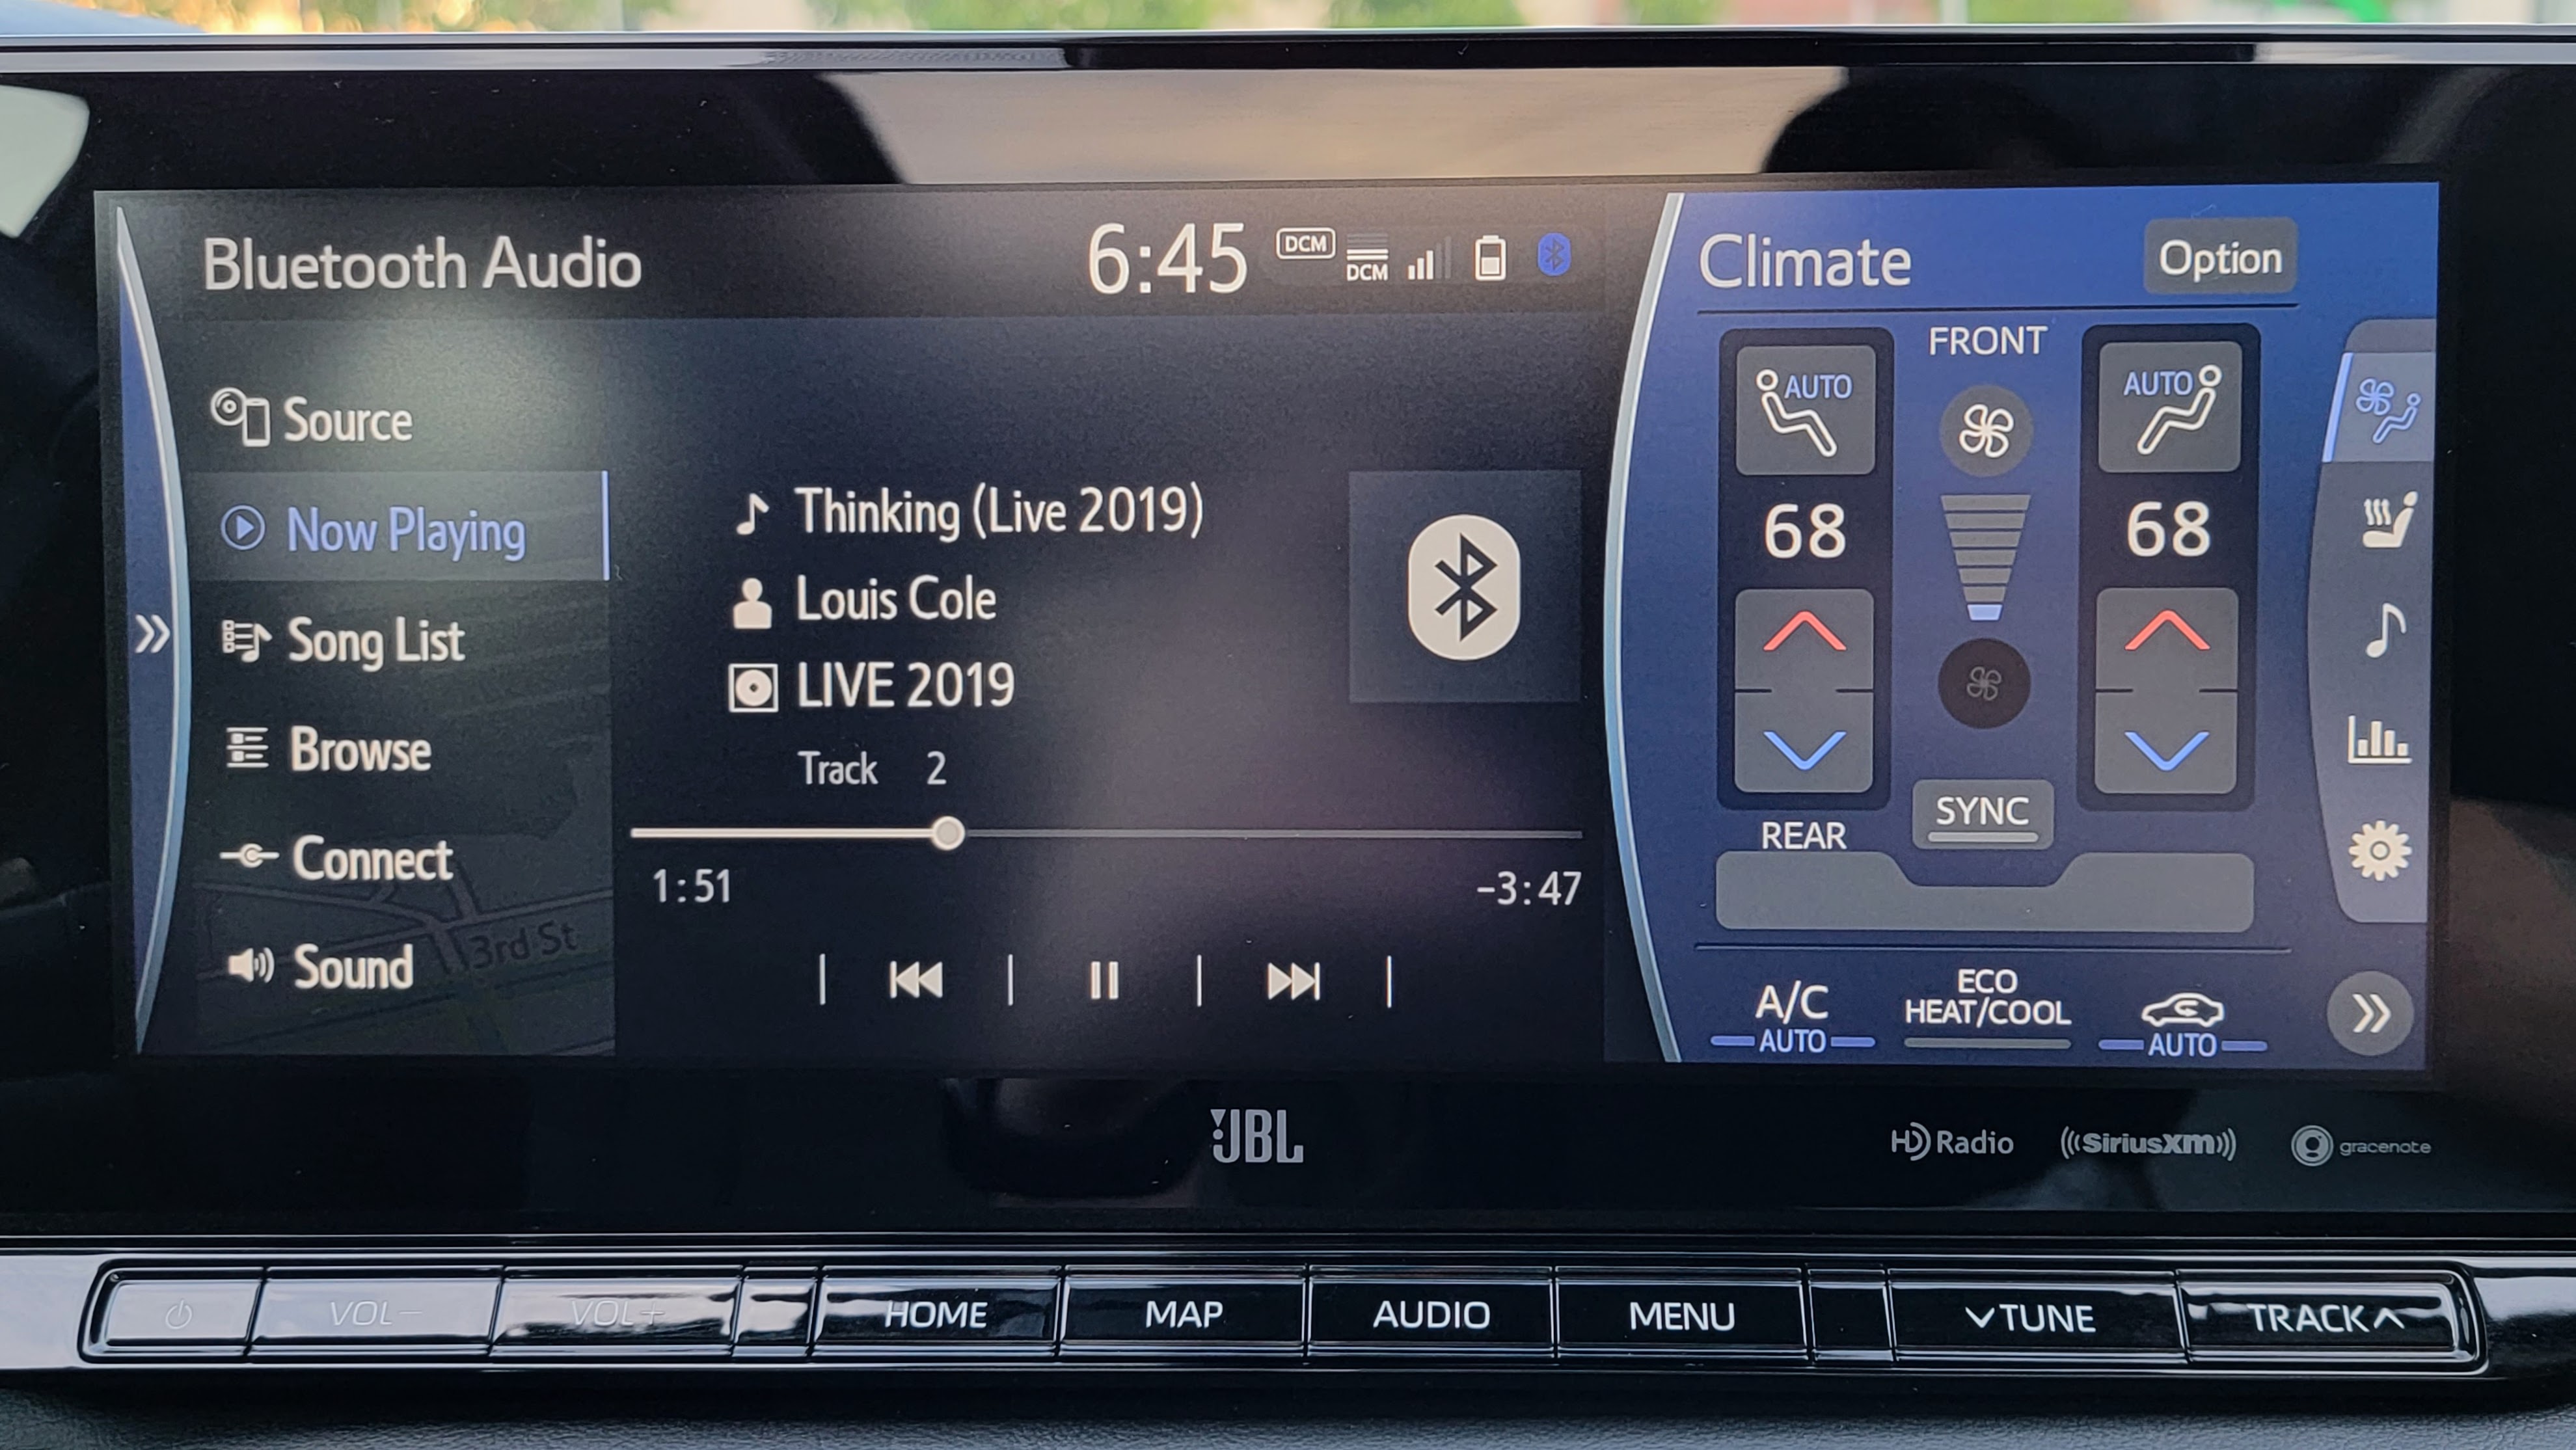 Music and climate controls on a touchscreen